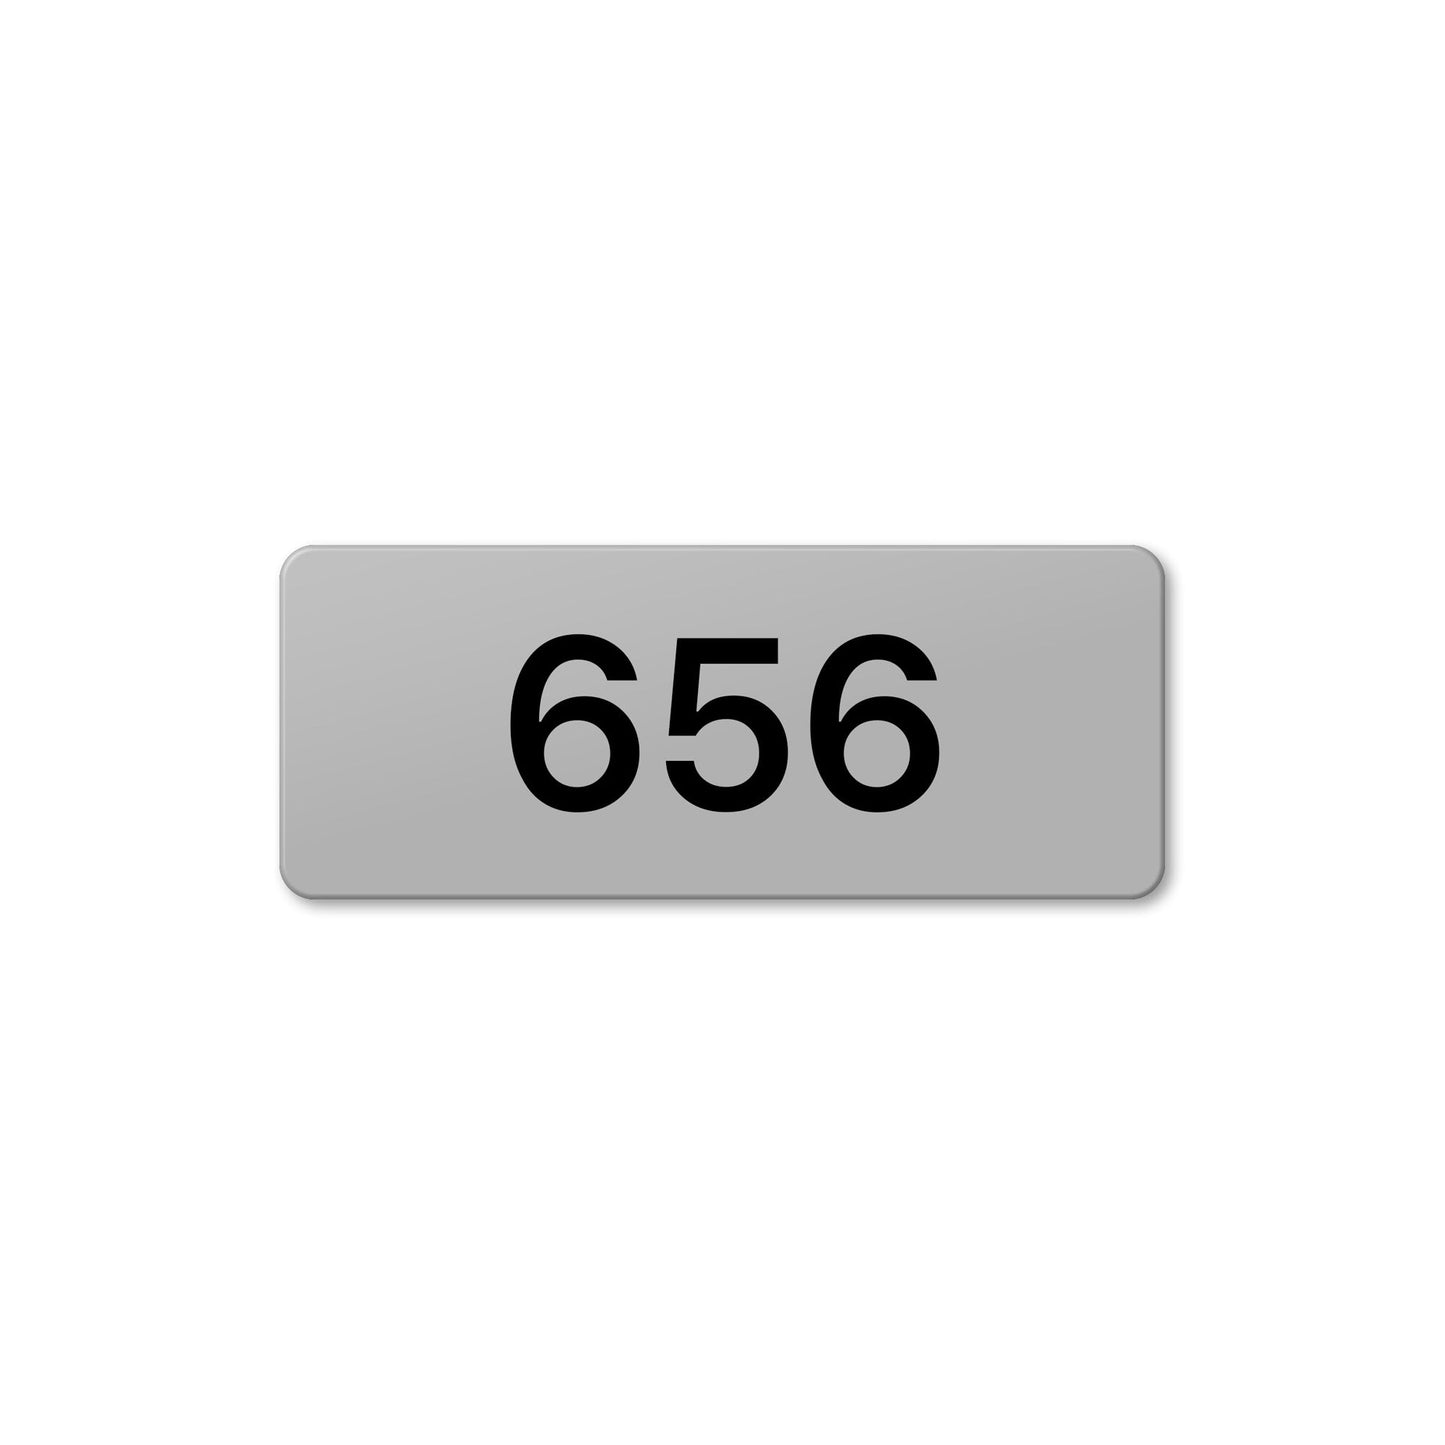 Numeral 656